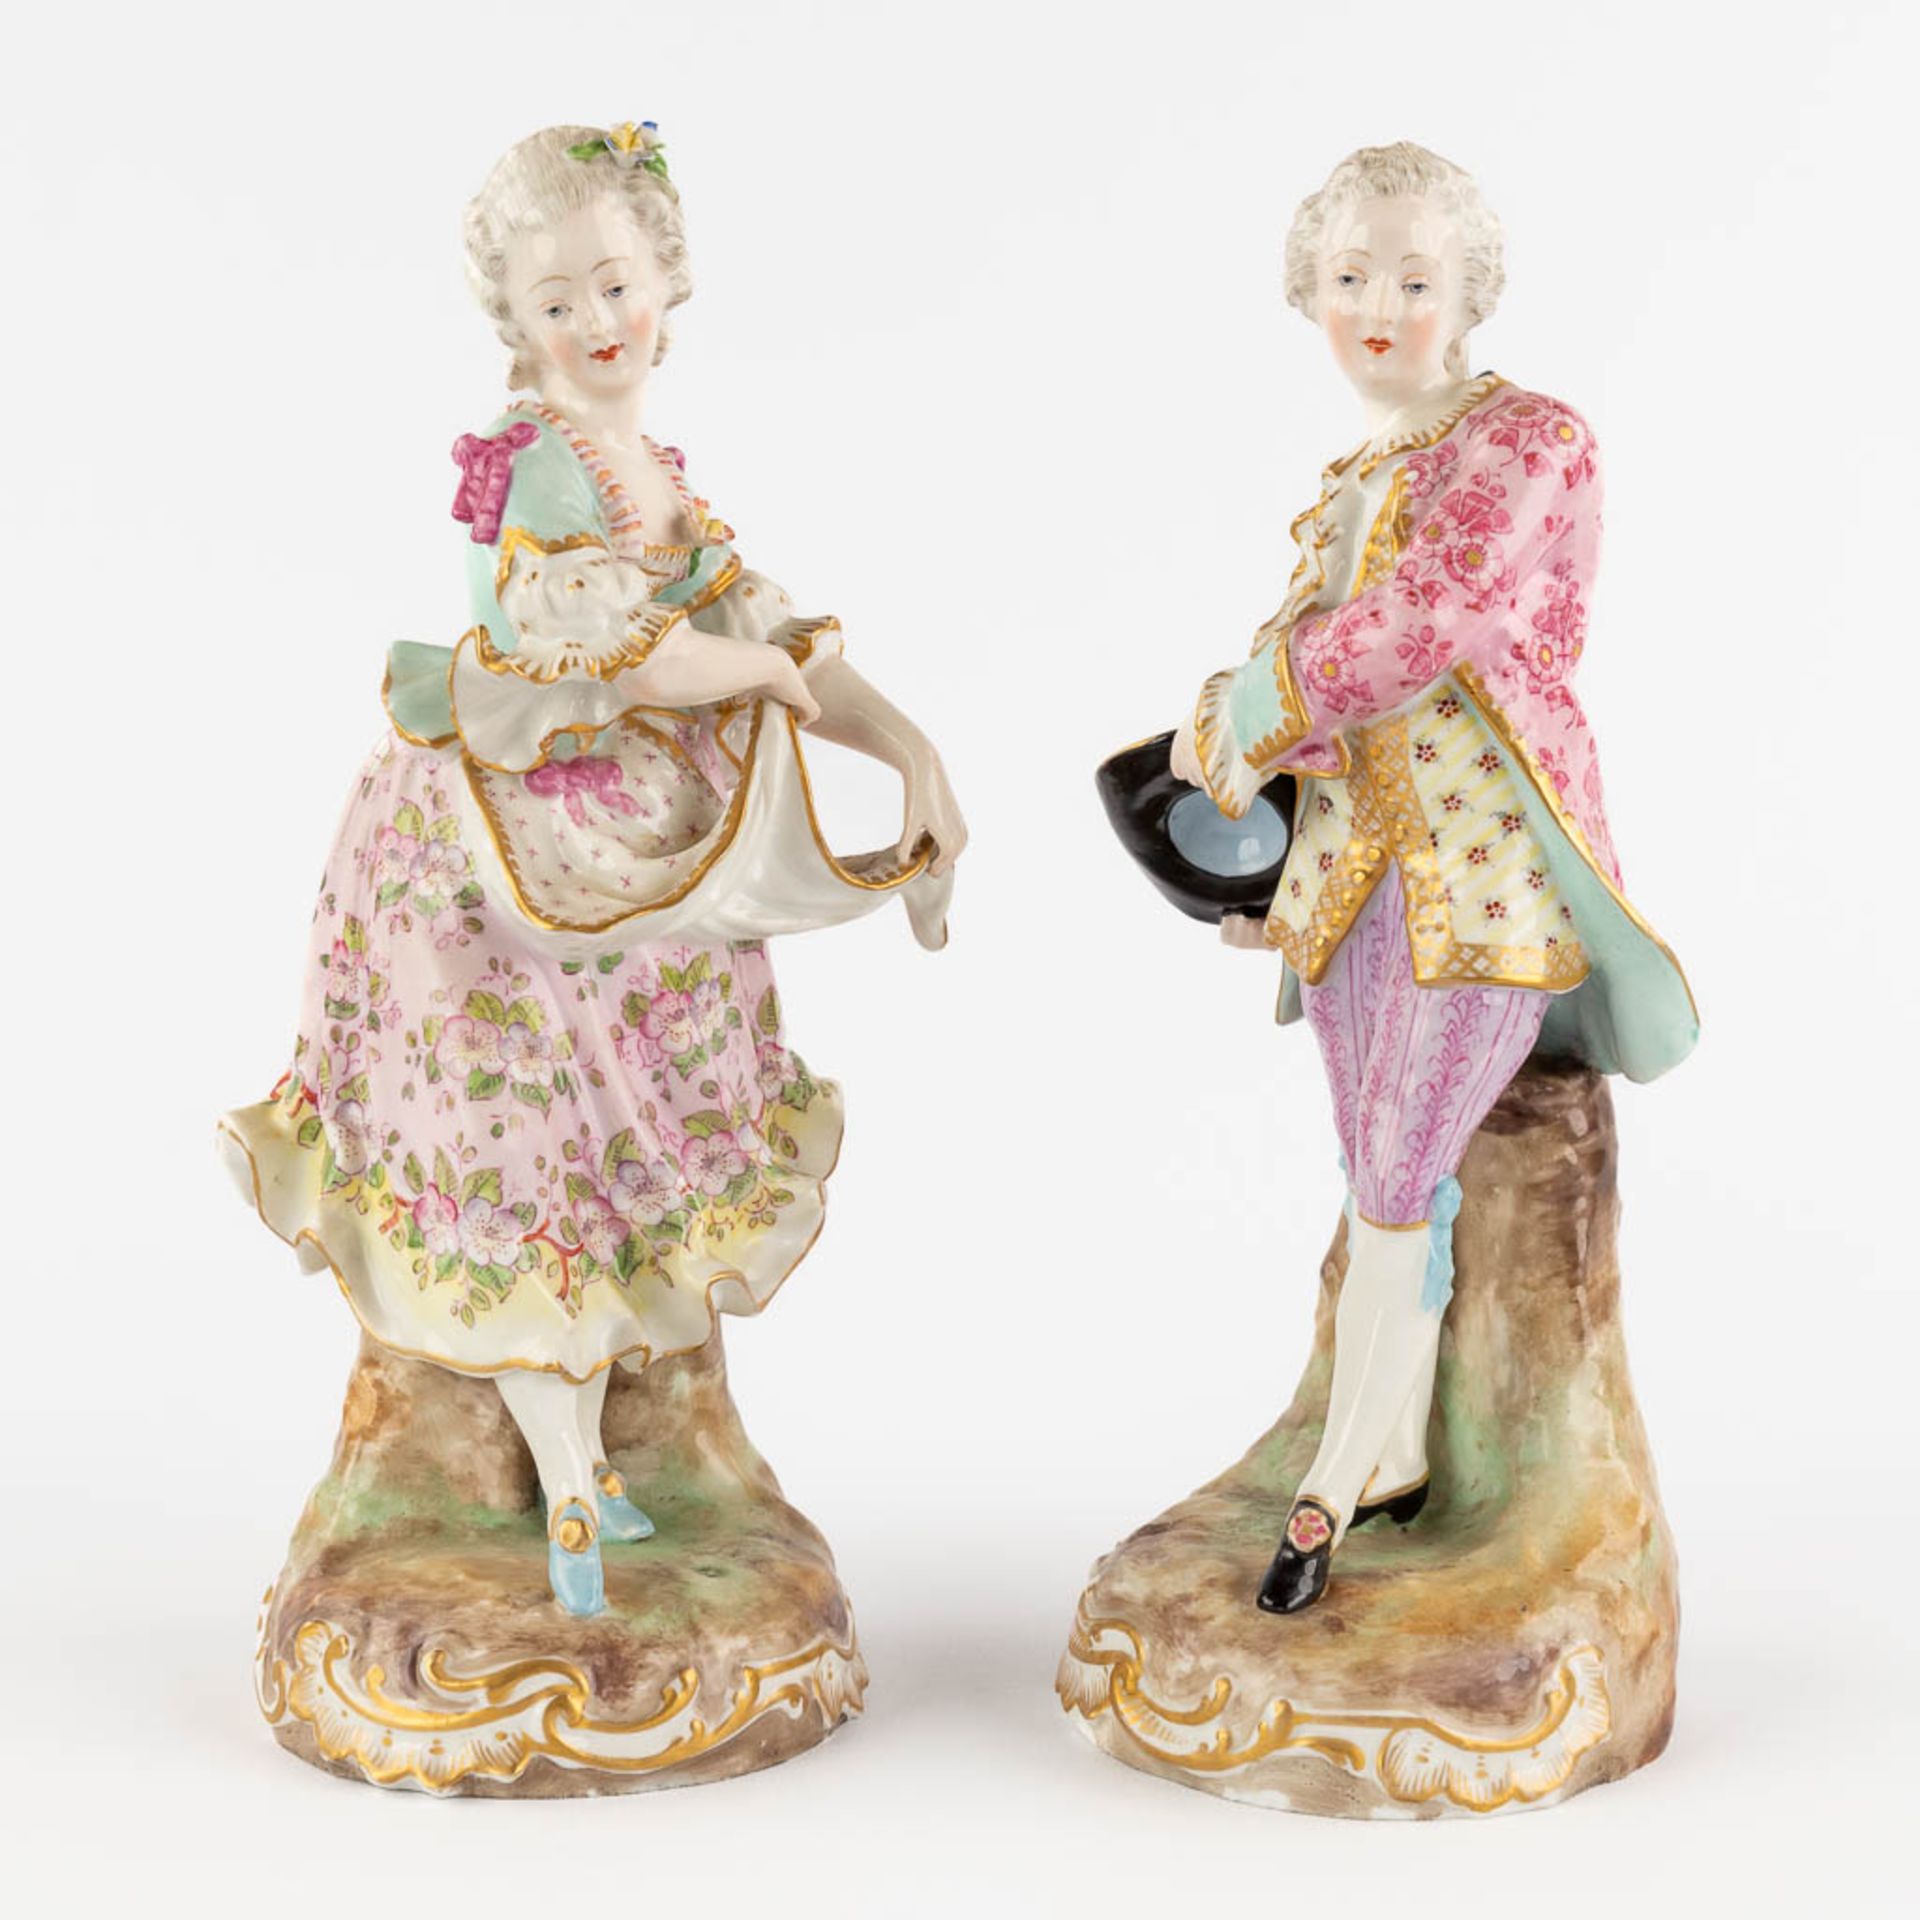 A Noble man and woman, polychrome porcelain with Meissener marks. (H:23 cm)